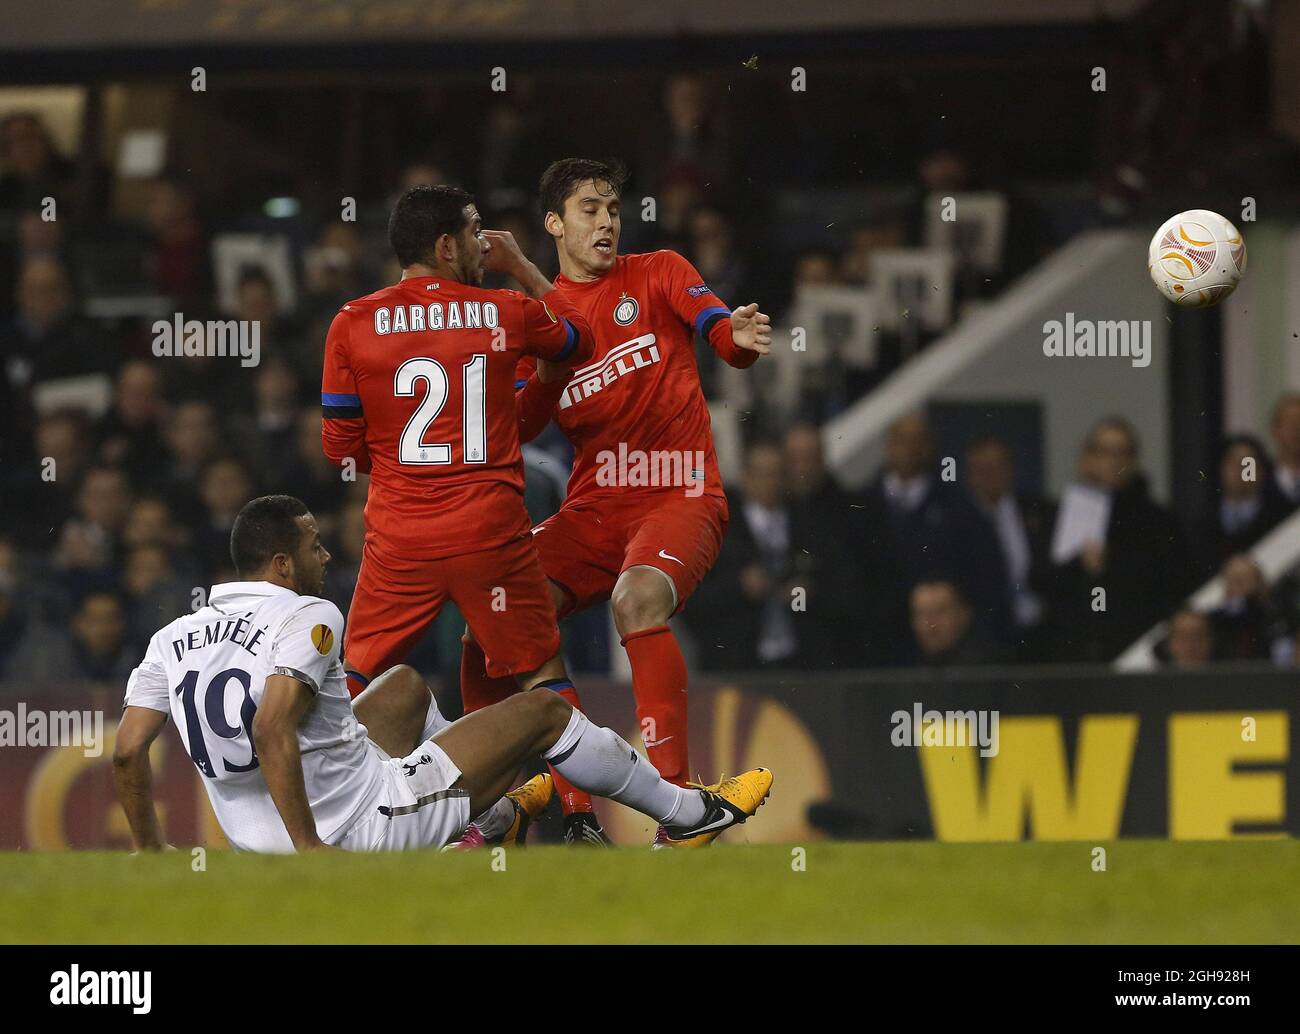 Tottenham's Moussa Dembele tussles with Inter's Walter Gargano and Andrea Ranocchia during the UEFA Europa League round of 16 first leg soccer match between Tottenham Hotspur and Inter Milan at White Hart Lane in London, United Kingdom on Thursday, March 7, 2013. Stock Photo